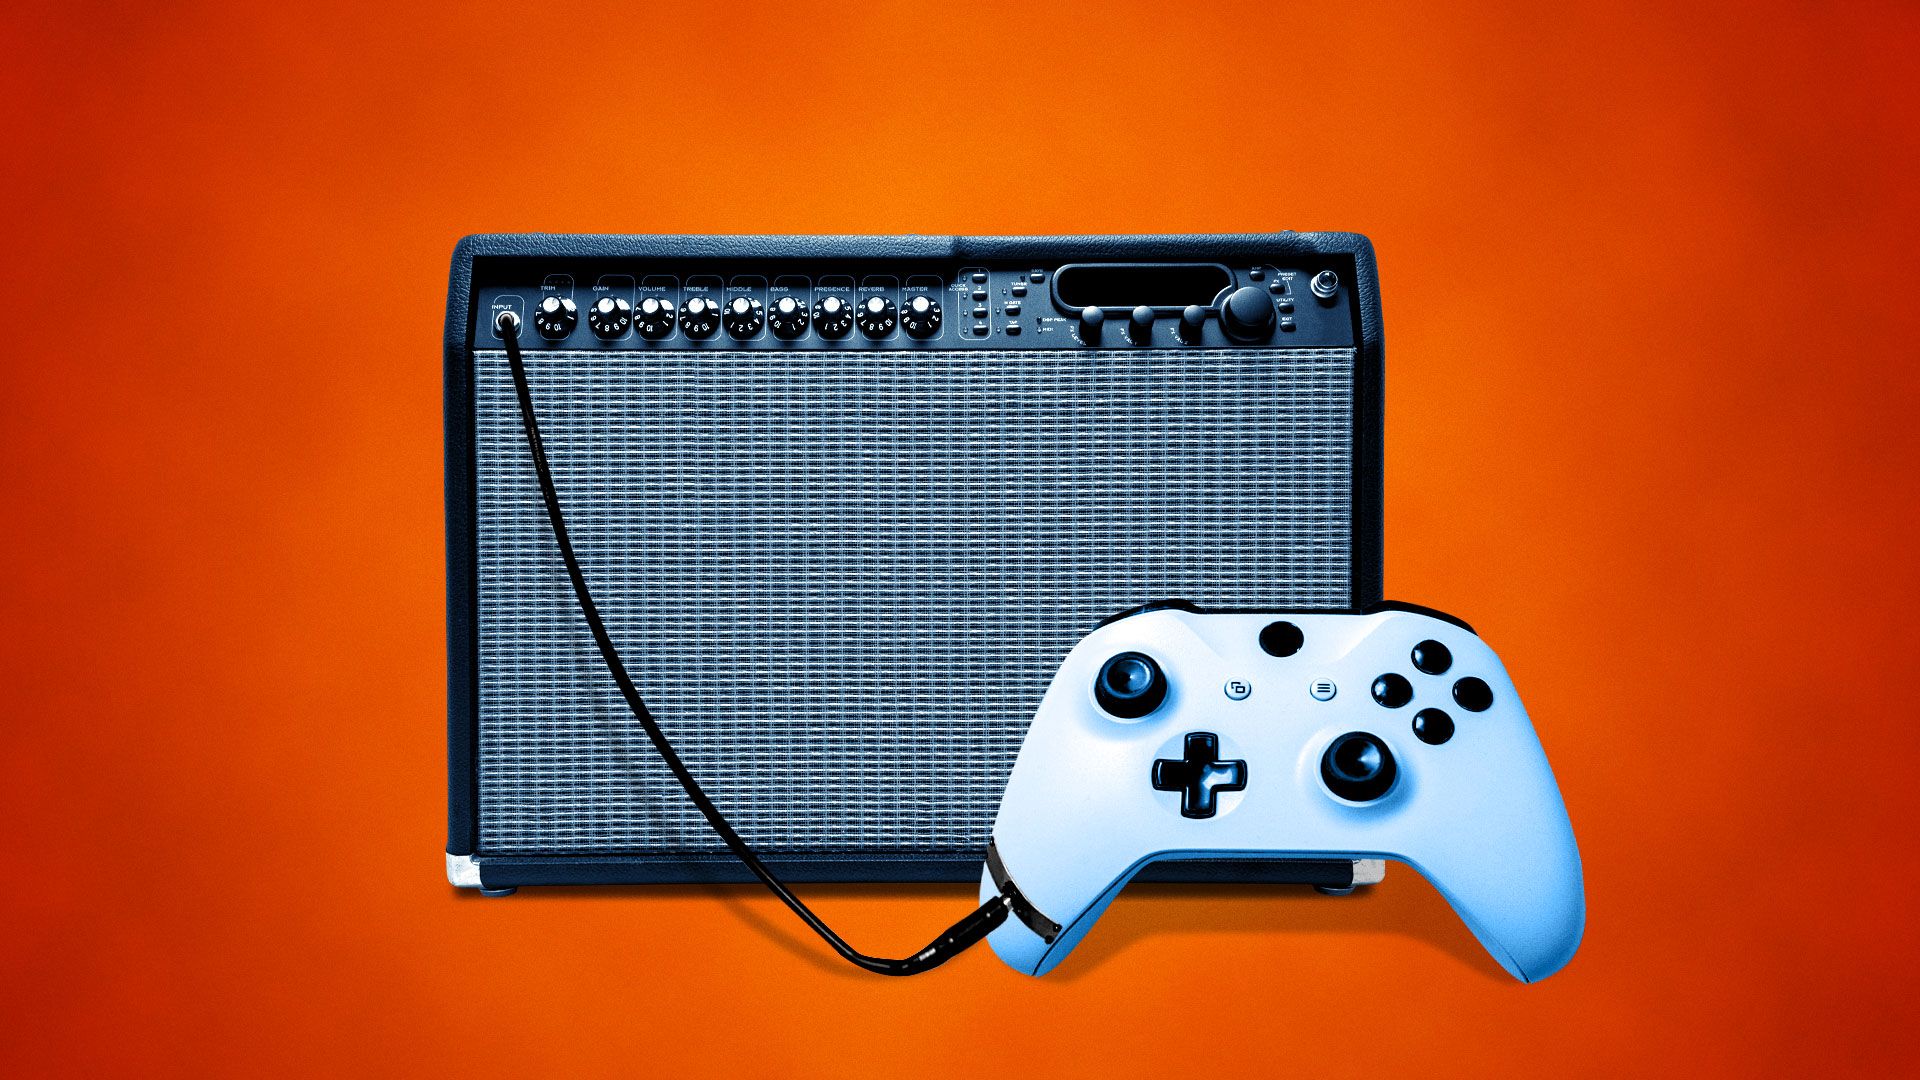 Illustration of video game controller plugged into an amp